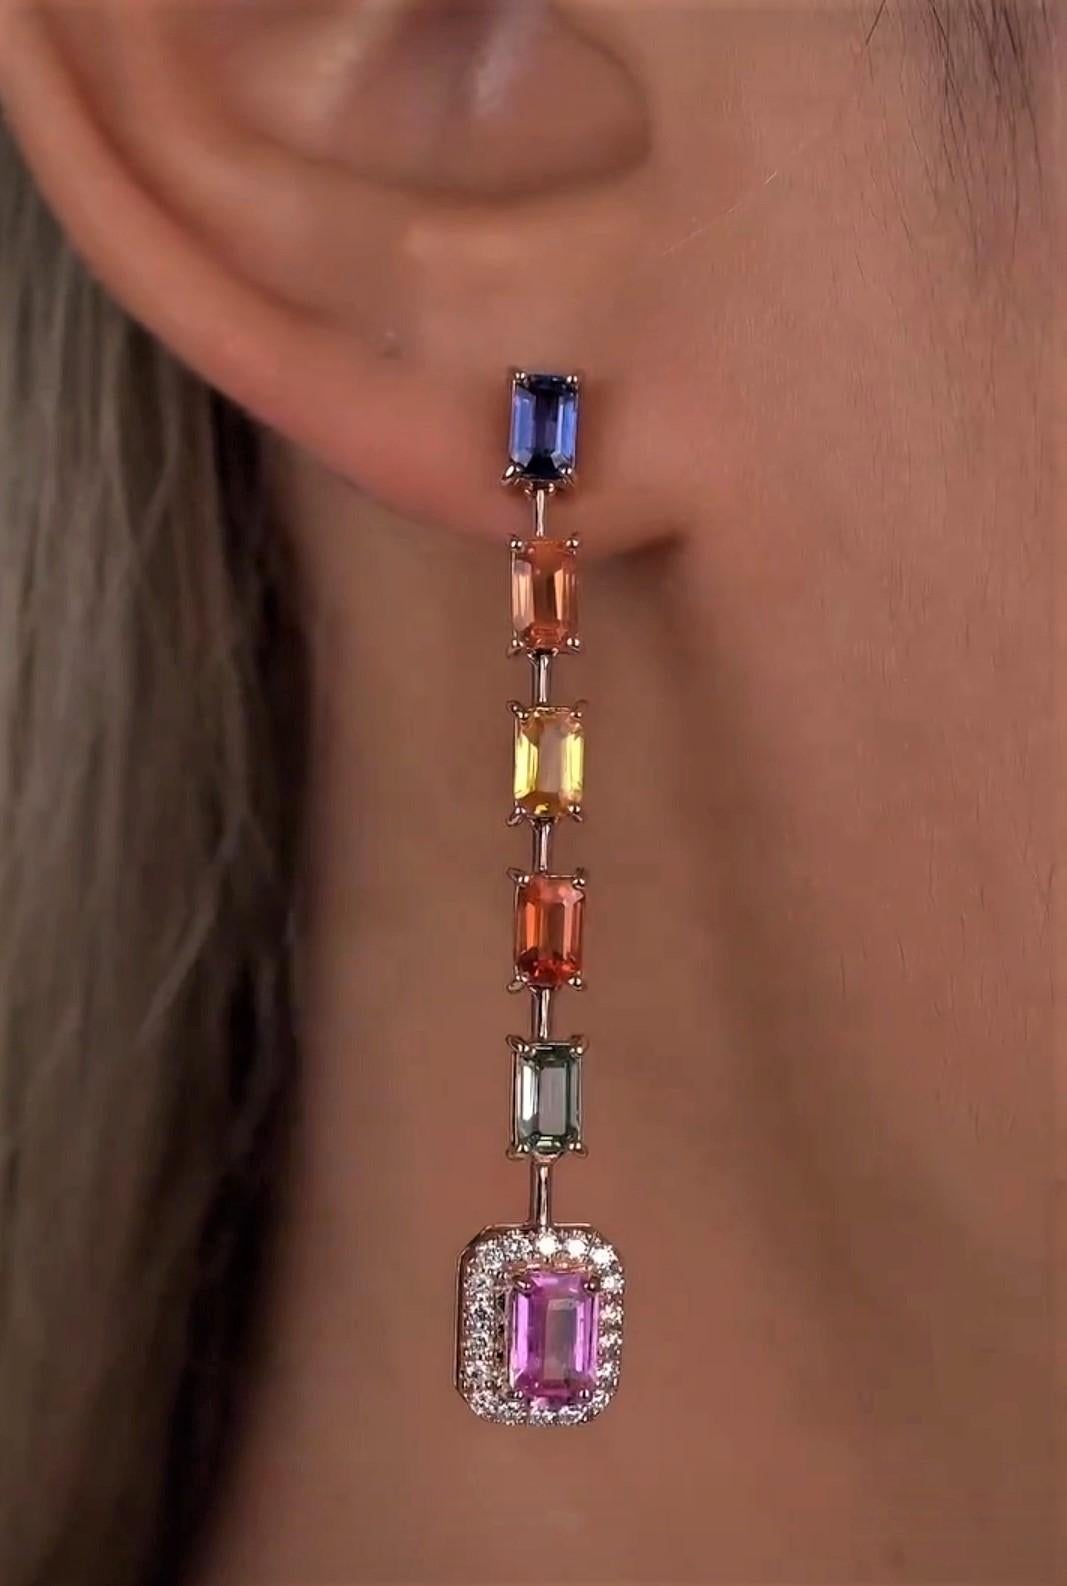 The Following Items we are offering is a Rare Important Radiant Pair of 18KT Gold Large Glistening Magnificent Large Fancy Multi Colored Rainbow Sapphire Diamond Dangle Earrings. Stones are Very Clean and Extremely Fine! Approx T.C.W. 4.50CTS!!!